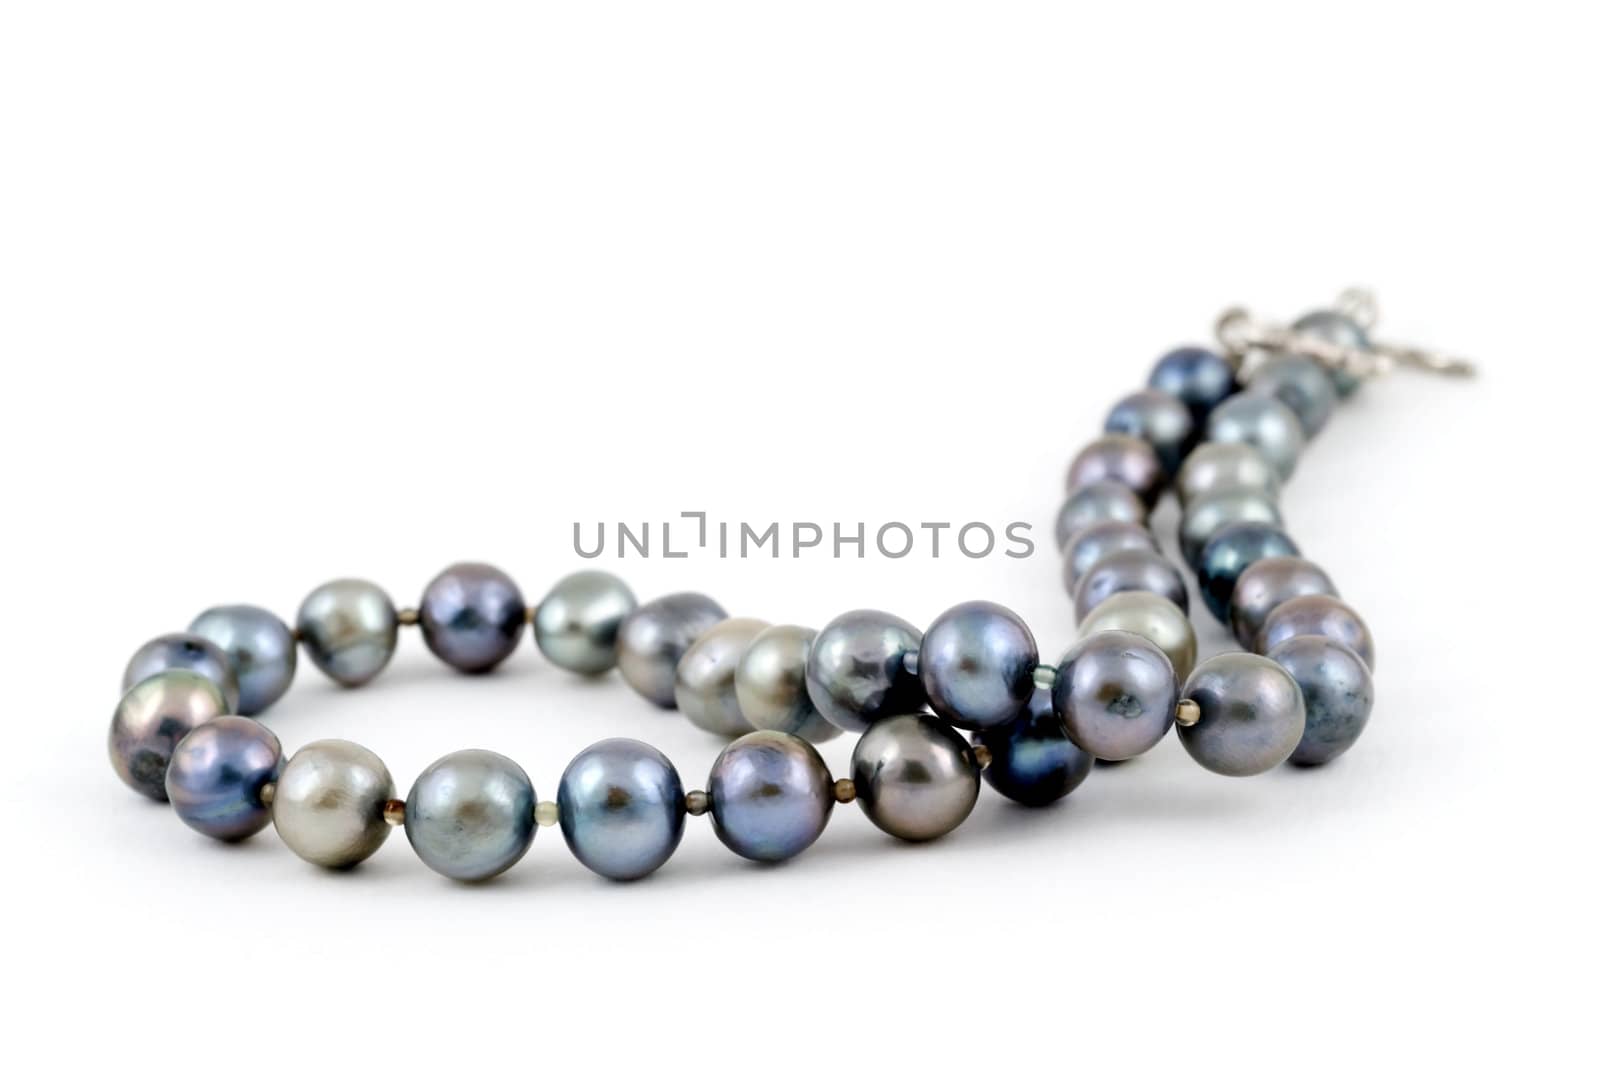 A beautiful necklace made of pearls of the Andaman sea of the coast of Thailand, on a white background. Adobe RGB color profile.